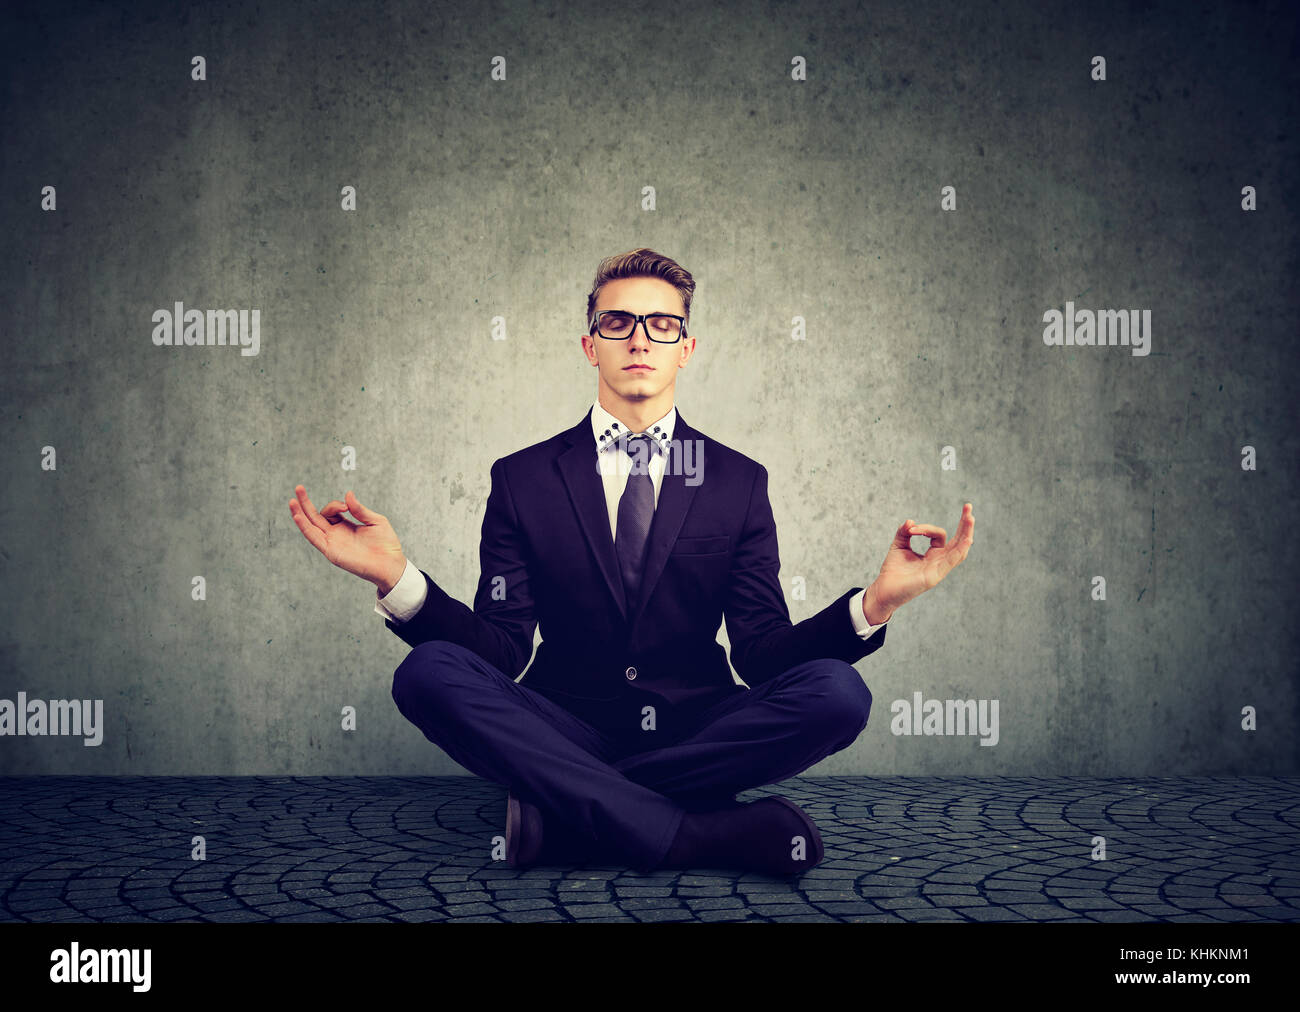 Business man meditating relaxing with eyes closed Stock Photo